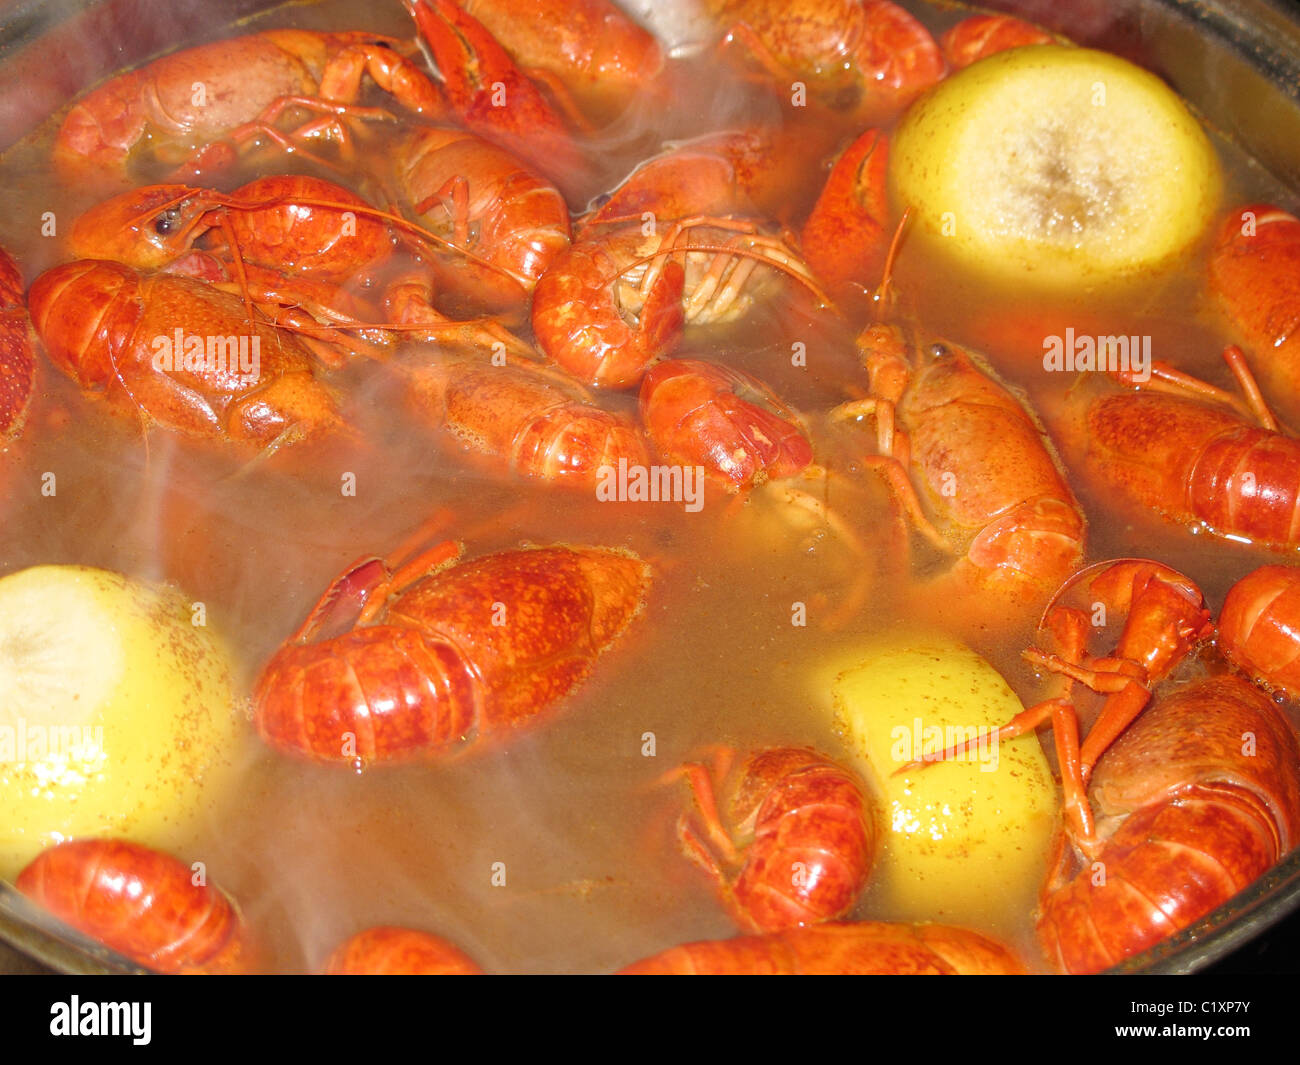 Crawfish boil, crawfish cooking and steaming in a pot with lemon Stock Photo